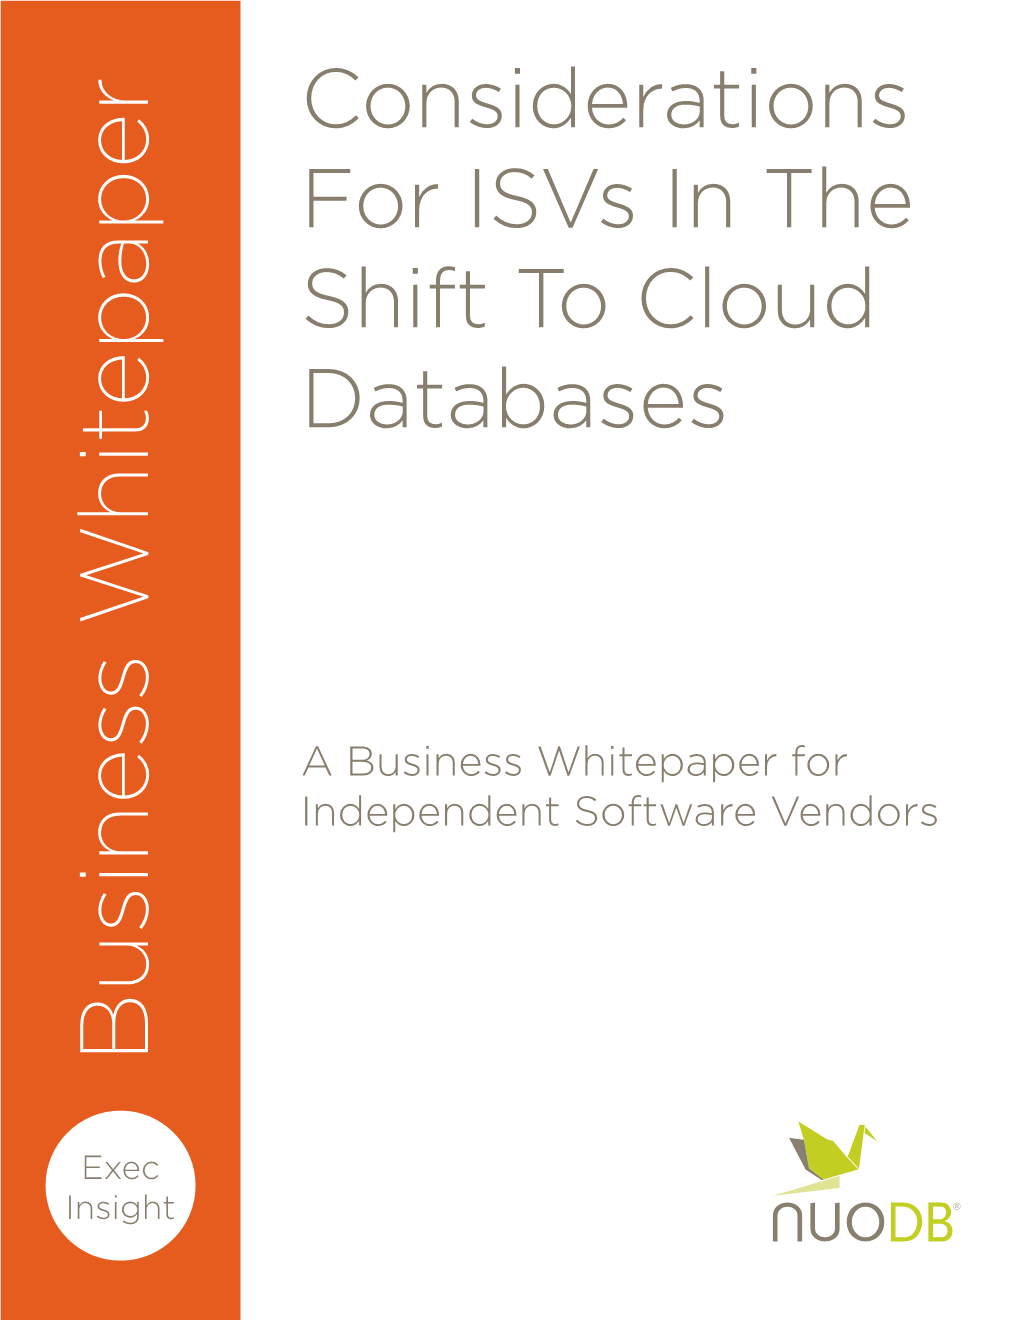 Considerations for Isvs in the Shift to Cloud Databases